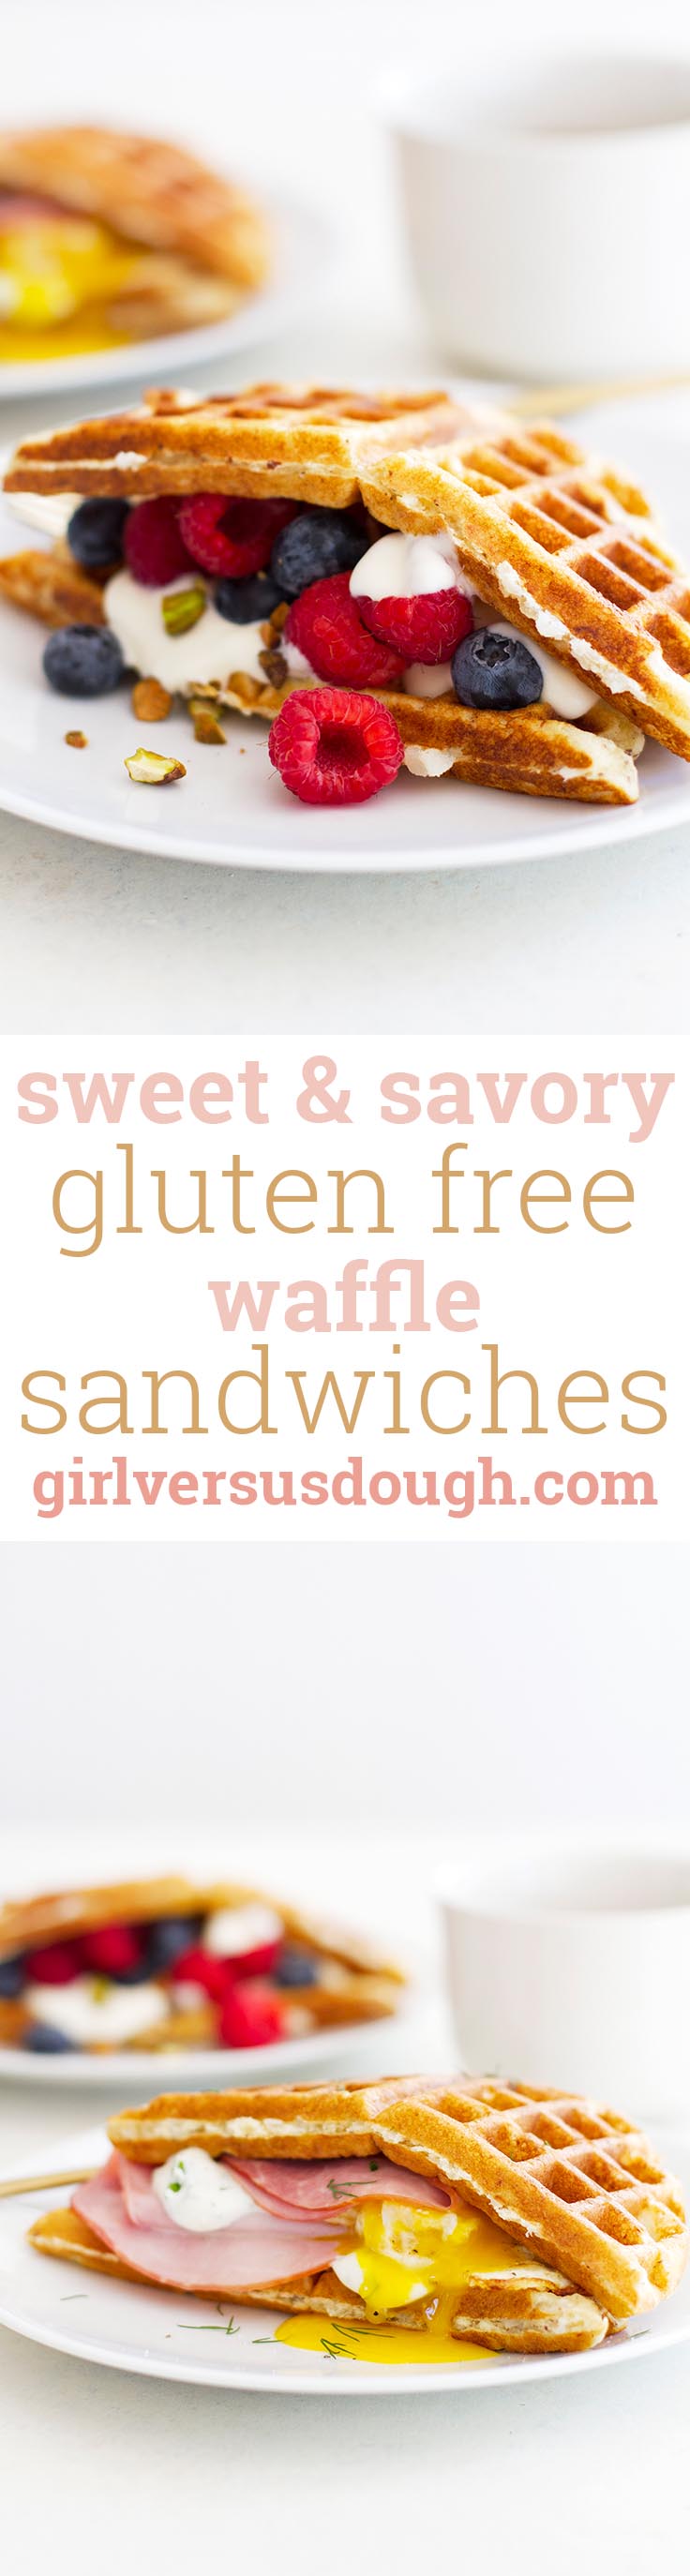 Sweet and Savory Gluten Free Waffle Breakfast Sandwiches -- Hash brown-loaded gluten free waffles topped with sweet or savory toppings; perfect for brunch! www.girlversusdough.com @girlversusdough